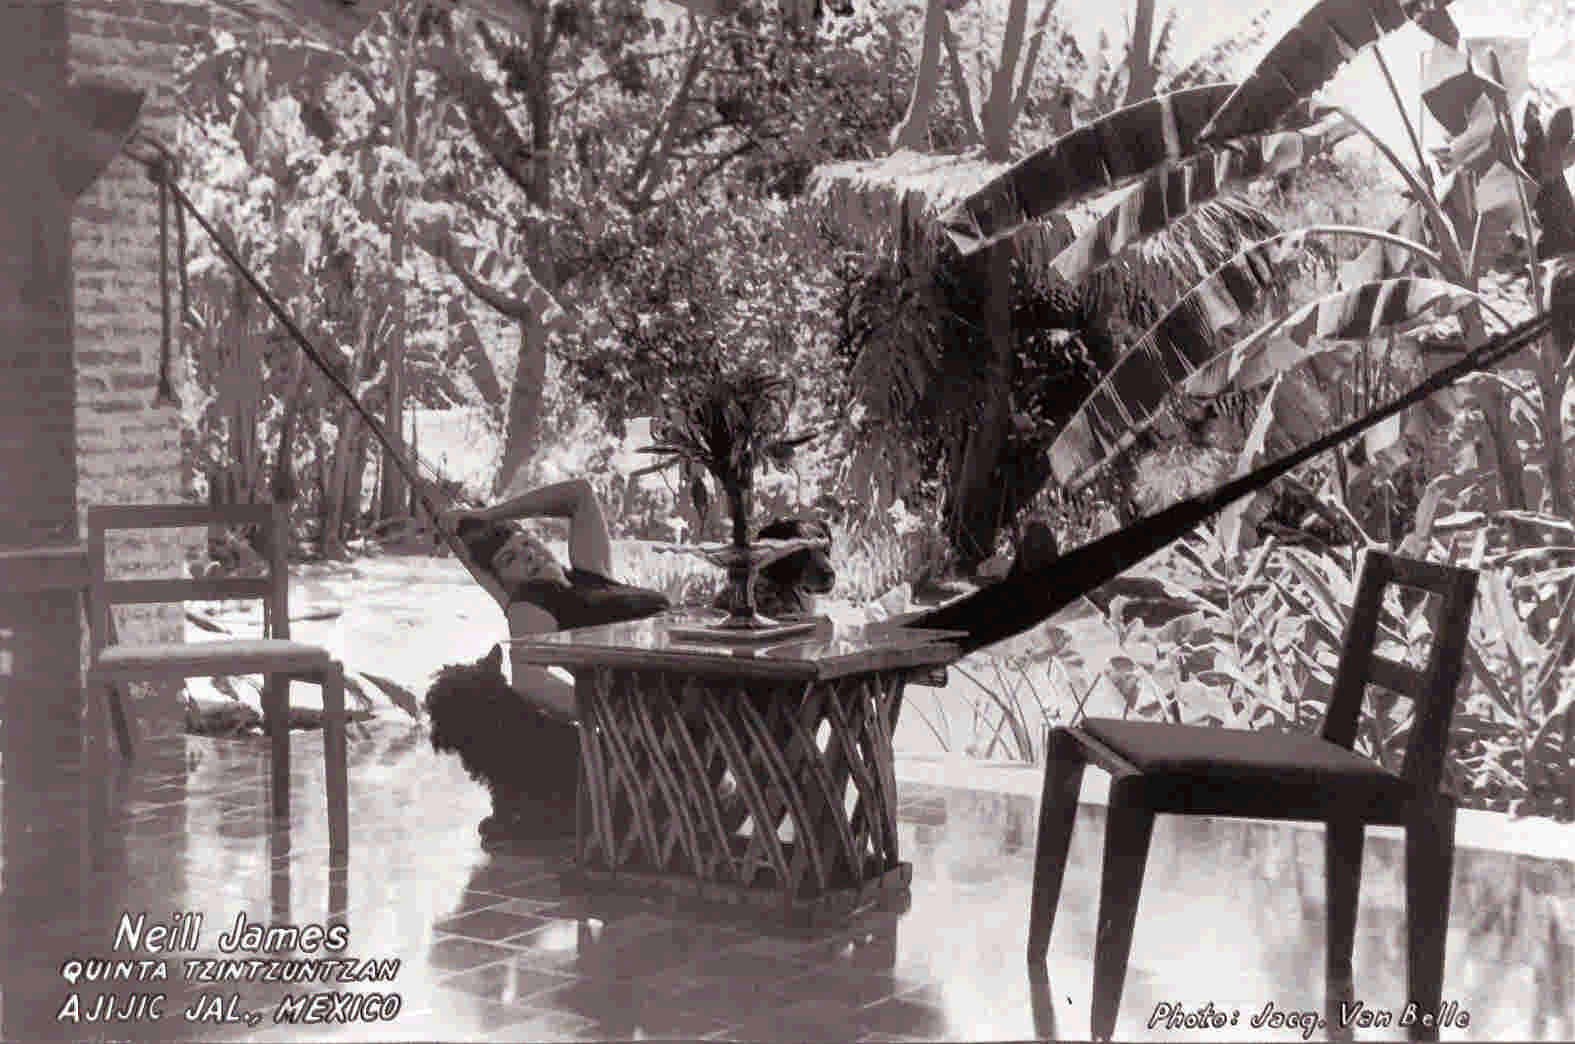 Jacques Van Belle. c 1957. Neill James in Hammock. (Fig 10-5 of Lake Chapala: A Postcard History.)